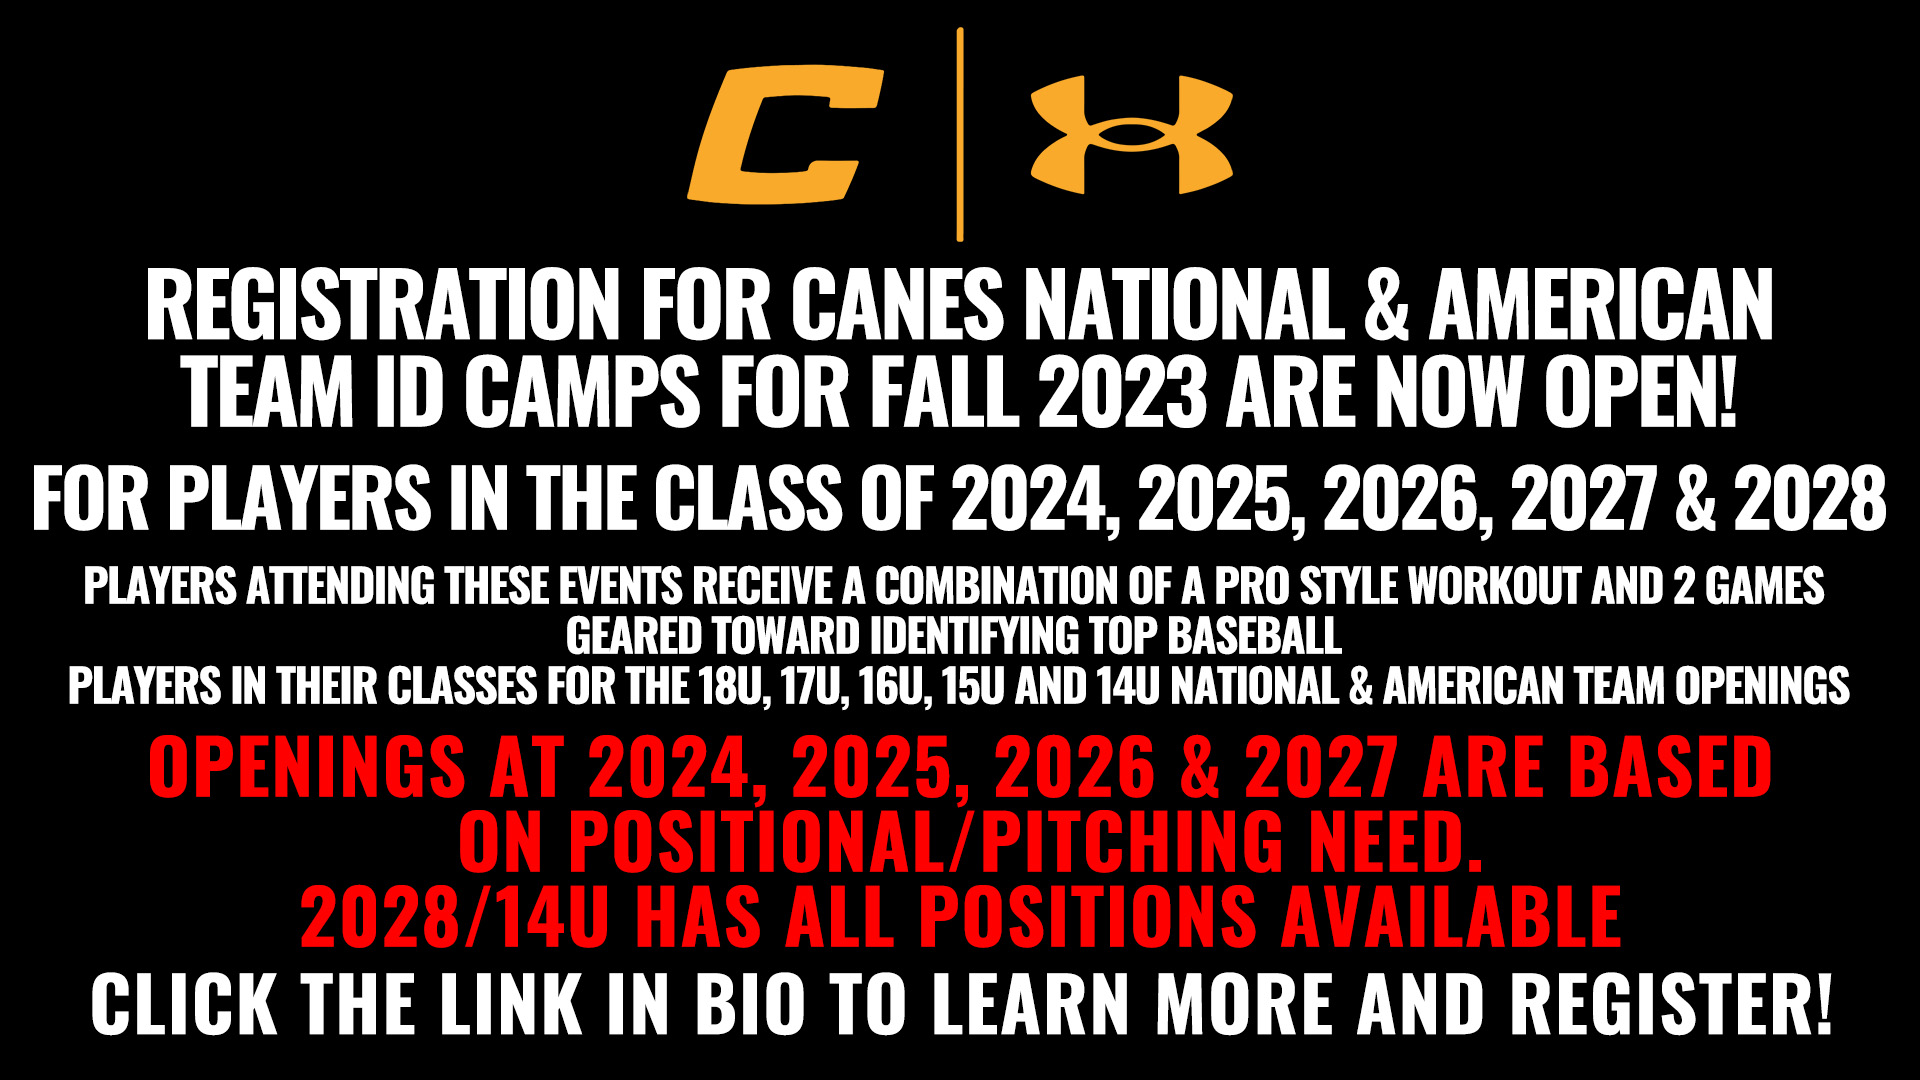 2023 National & American Team ID Camps Canes Baseball